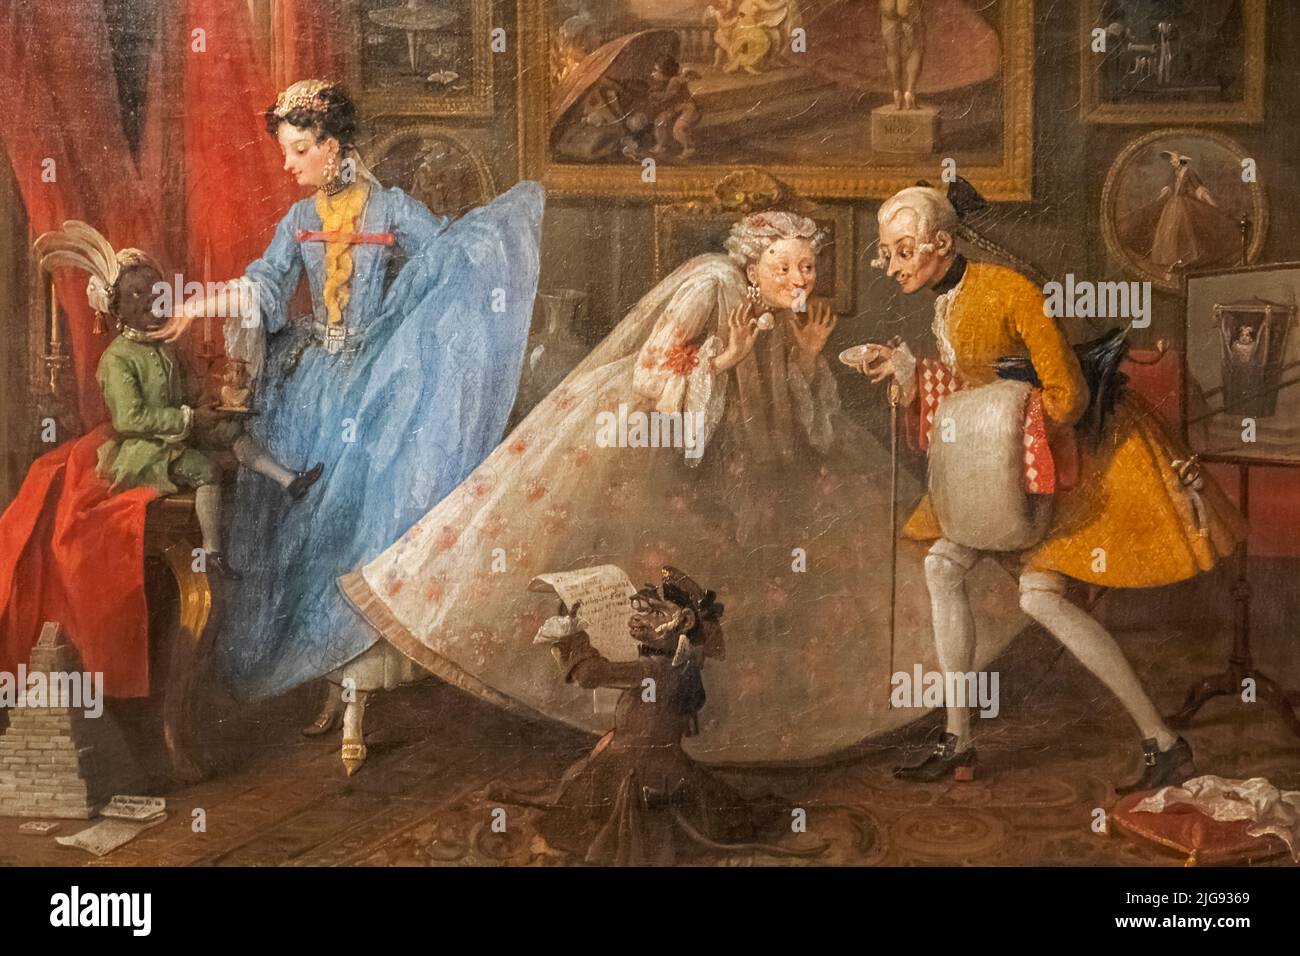 Painting titled 'Taste in High Life' by William Hogarth dated 1742 Stock Photo